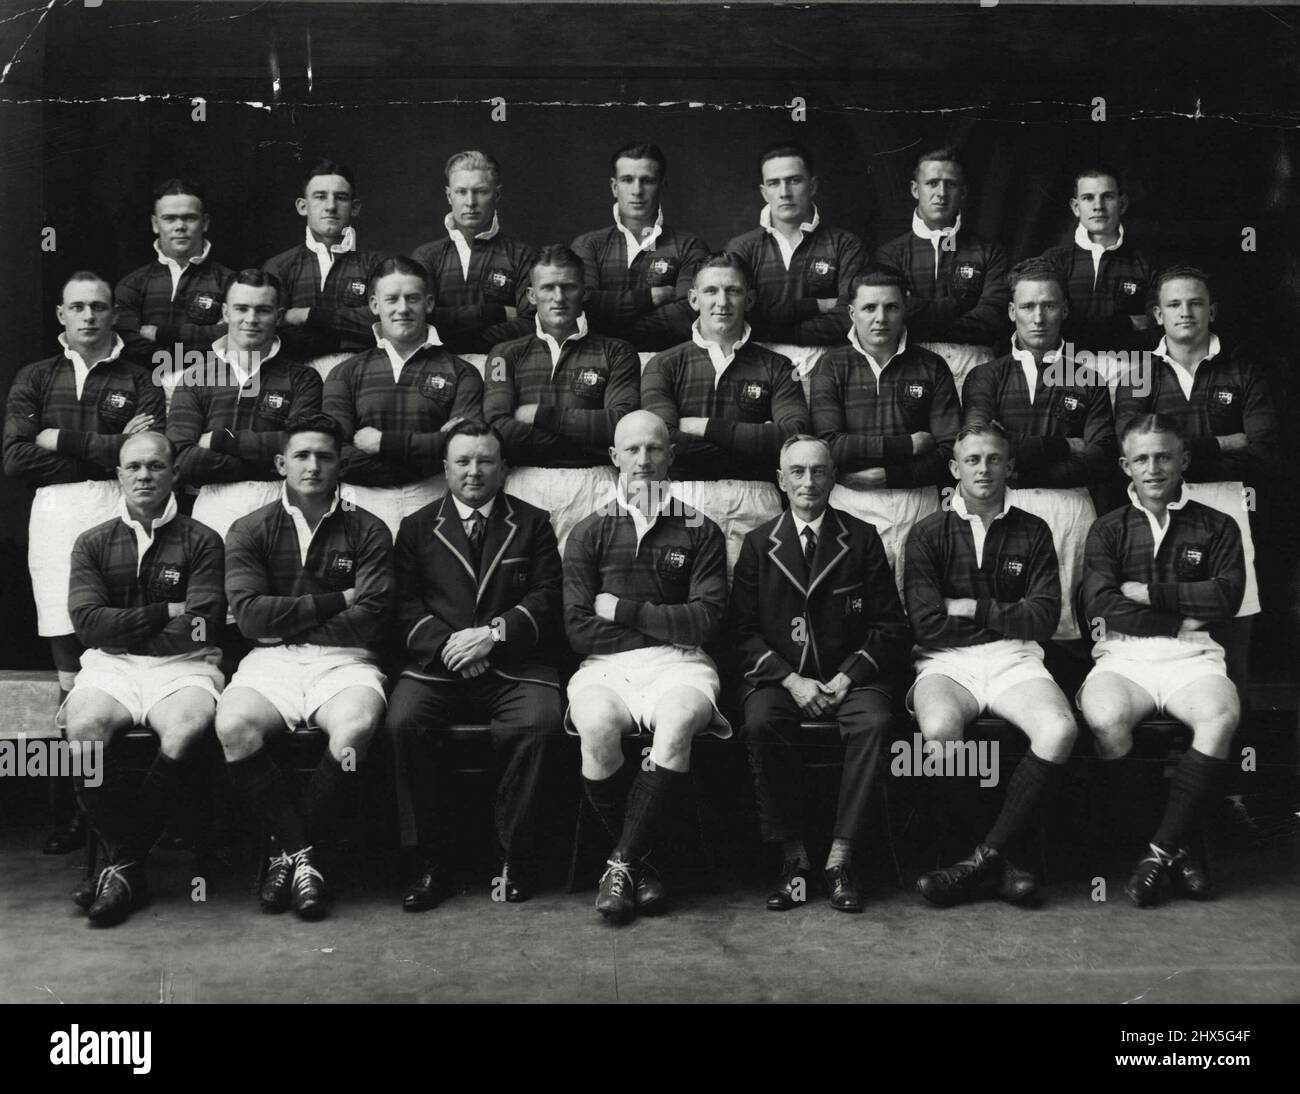 Australia's Rugby League team to tour N.Z. Left to right from back: F. Gilbert, E. Lewis, S. Goodwin, J. Gibbs, M. Shields, L. Ward, G. K. Whittle, E. Collins, R. Stehr, F. Curran. H. Bichel, S. Pearce, R. Hines. W. Prigg, R. McKinnon, E. Norman, W. Mahon, H. Sunderland, D. Brown (capt). W. J. Chaseling, V. Thicknesse, and P. Fairall. September 23, 1935. Stock Photo